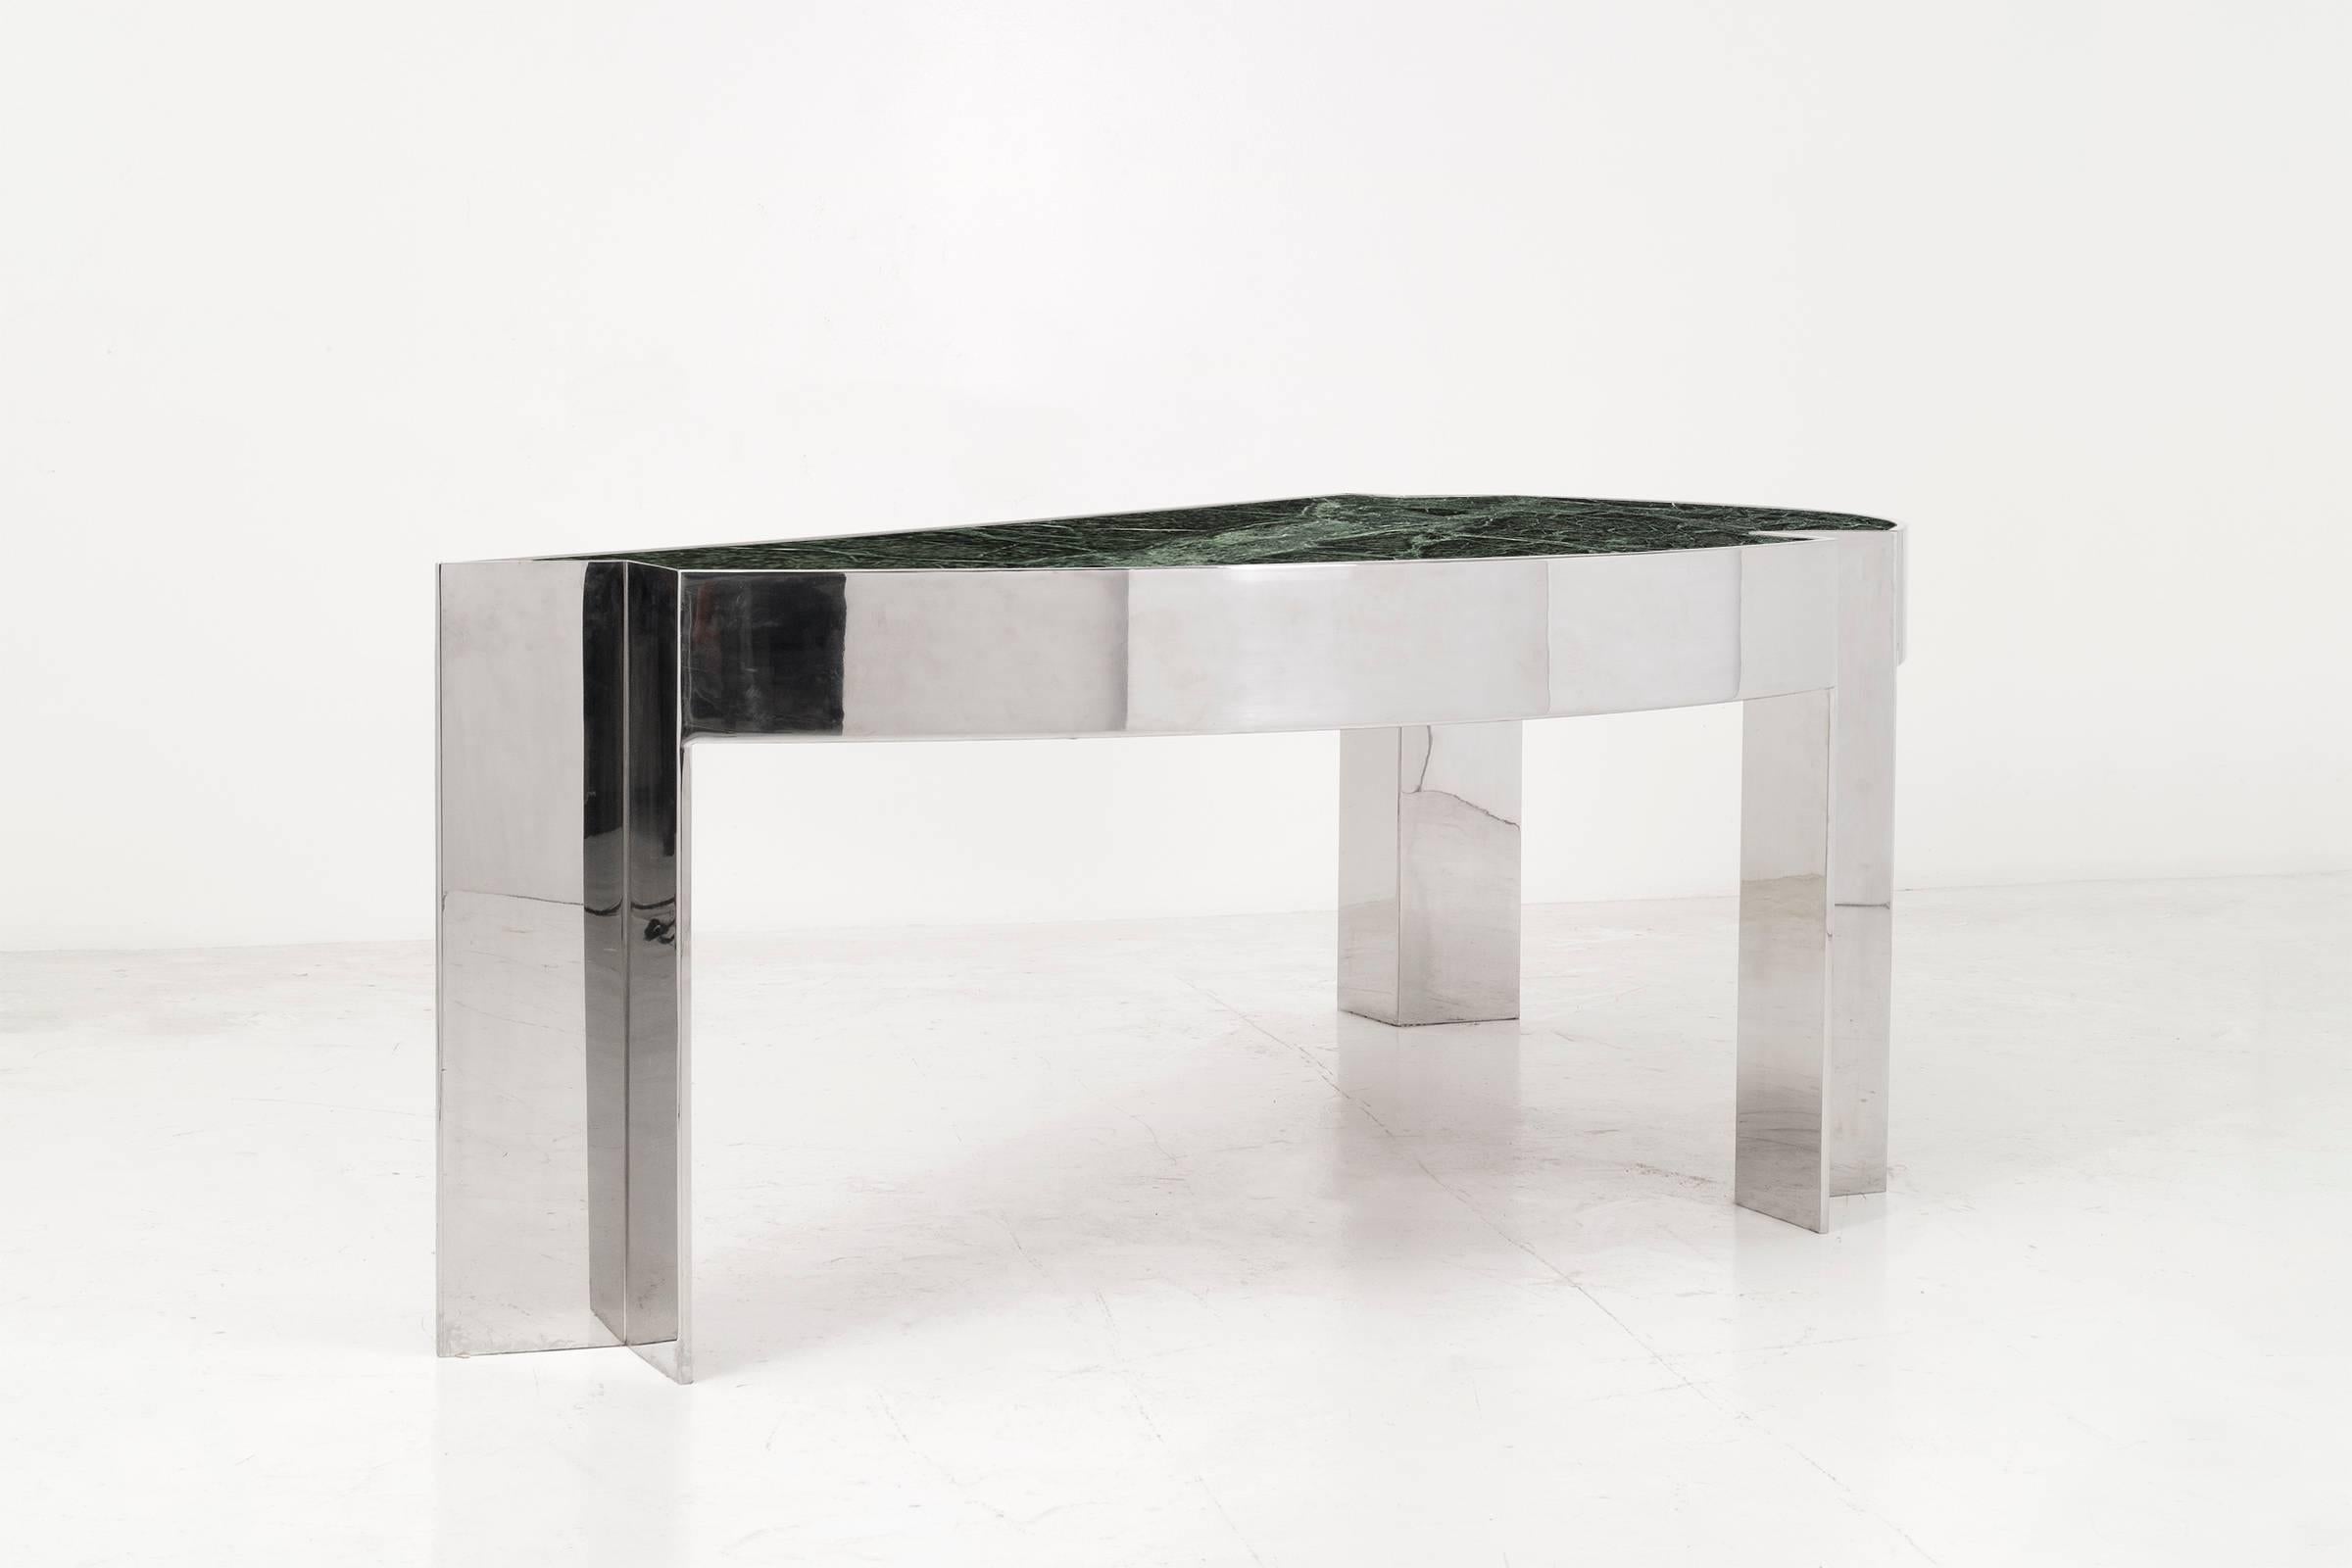 Arced desk with a polished steel frame and verde marble top. Two drawers with laminate fronts and wood inner.

Armchair clearance height: 27 in.